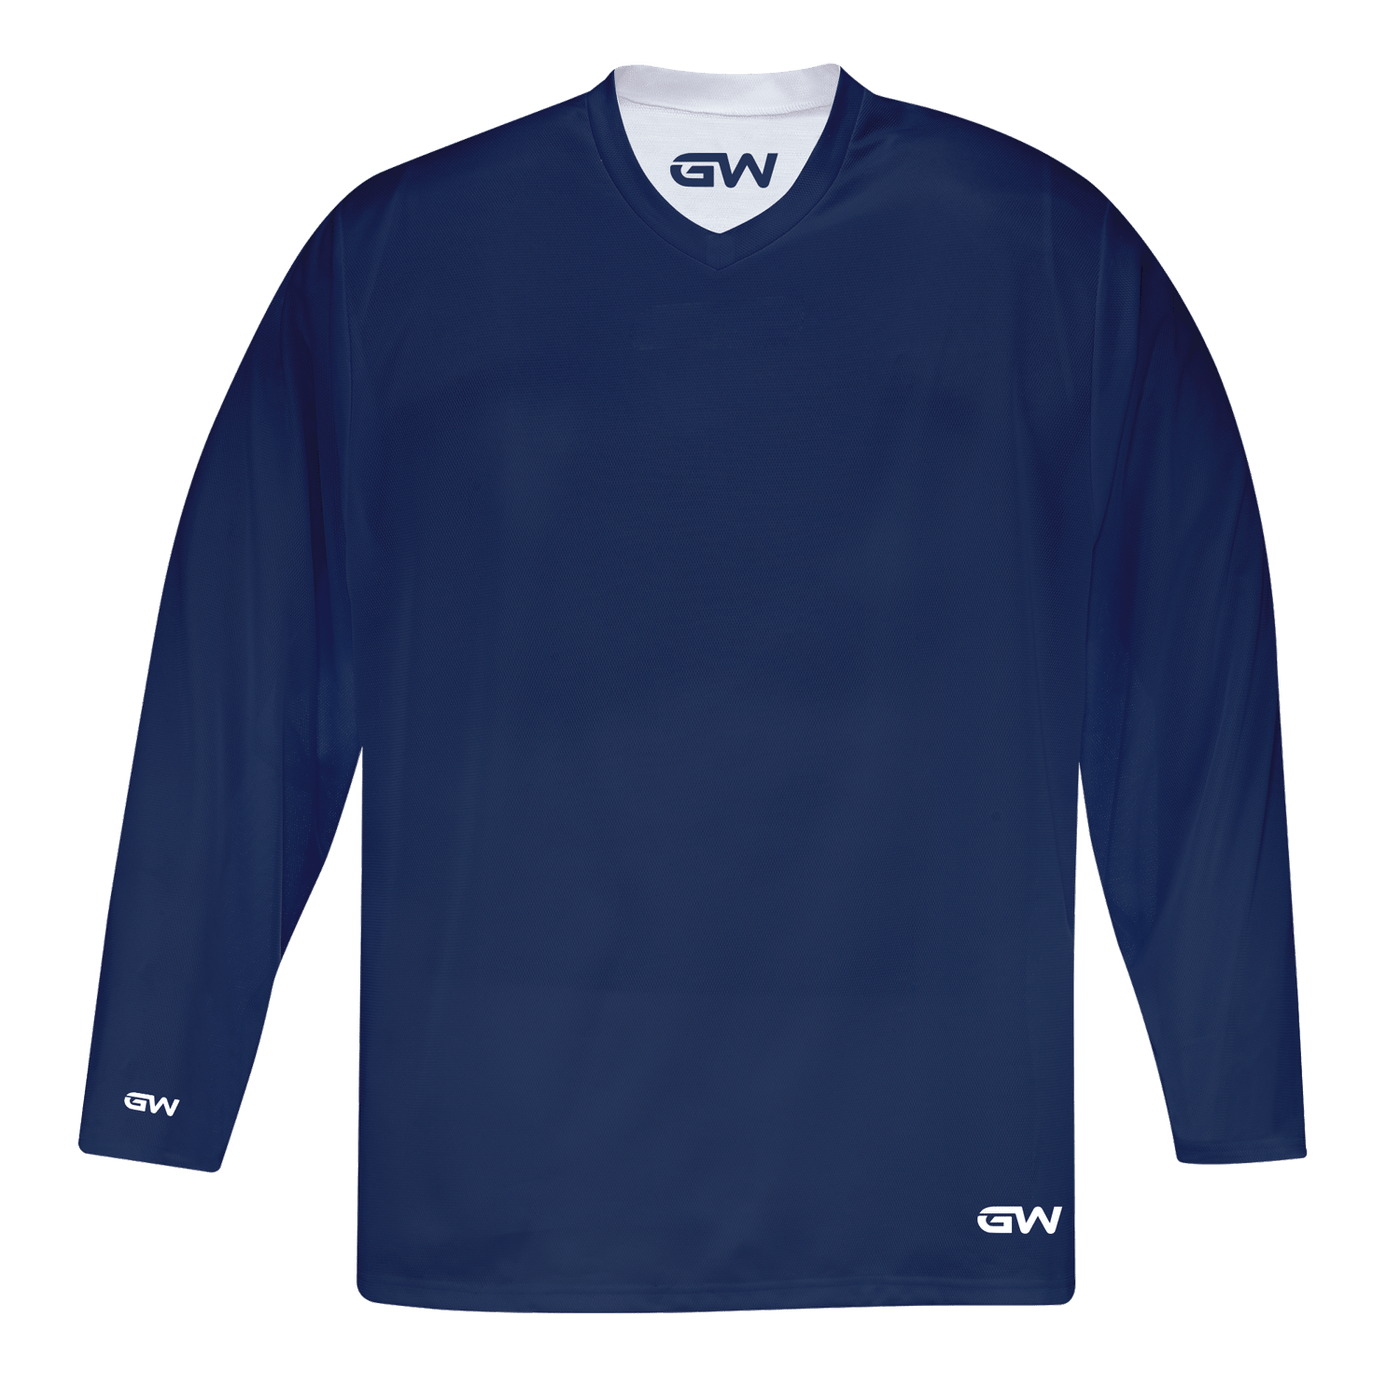 GameWear GW7500 ProLite Series Reversible Junior Hockey Practice Jersey - Royal / White - The Hockey Shop Source For Sports